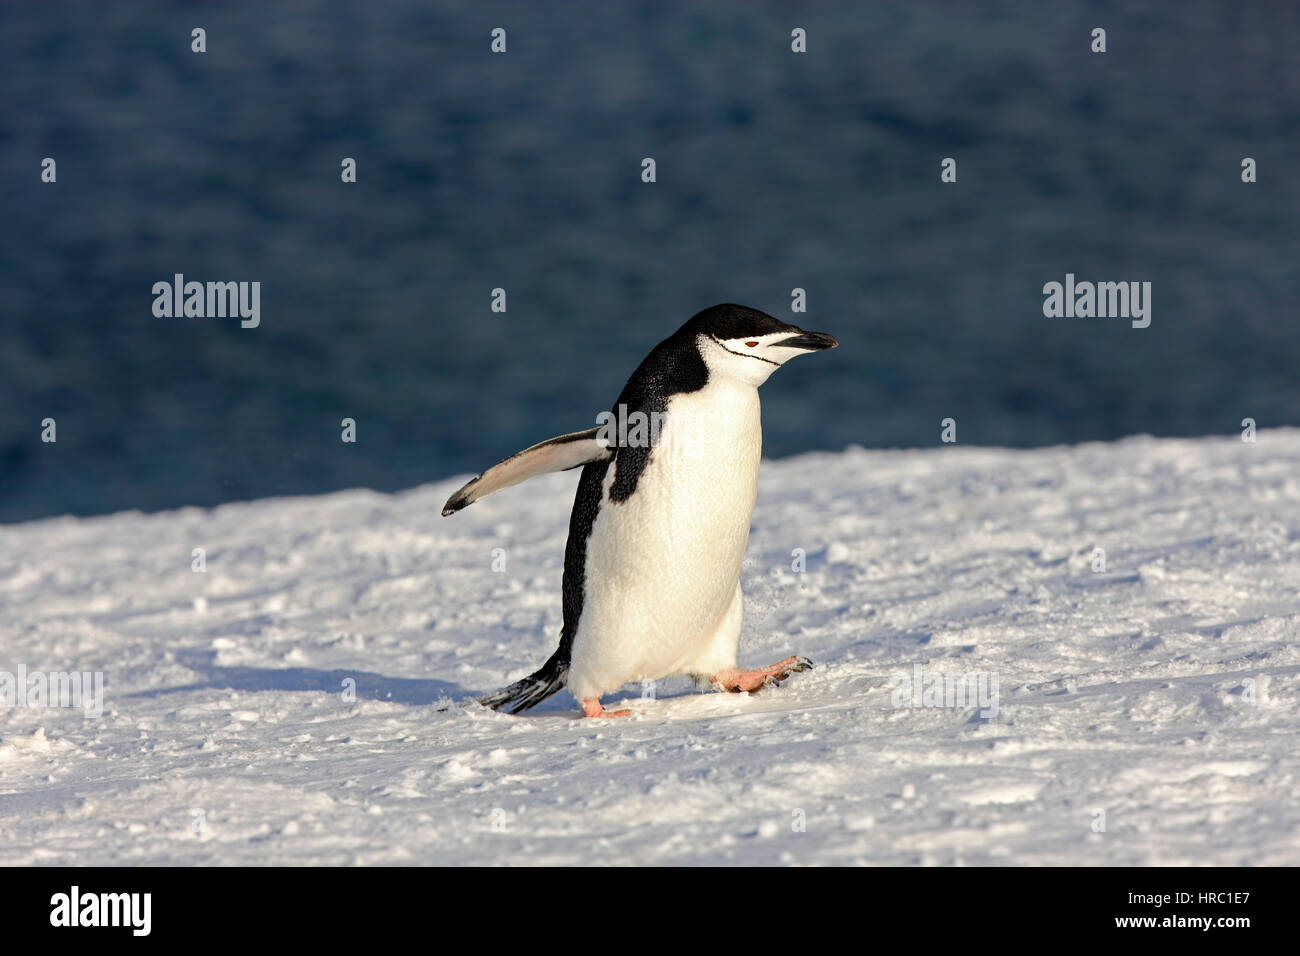 Chinstrap Penguin, (Pygoscelis antarctica), Antarctica, Brown Bluff, adult in snow spreads wings Stock Photo